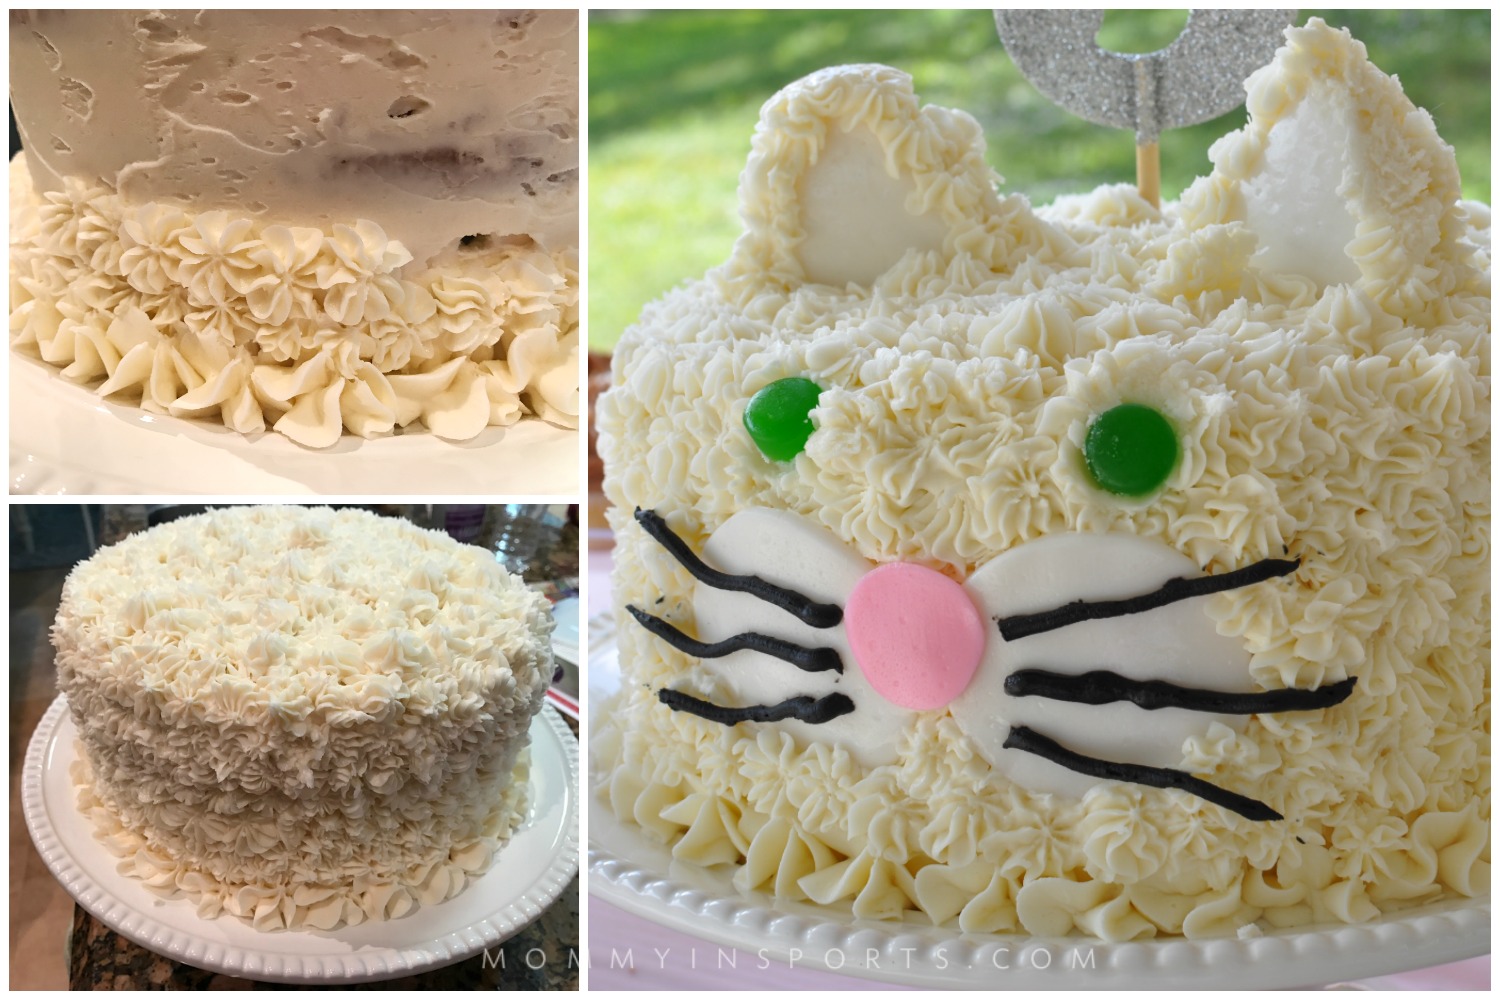 Is your little one obsessed with cats? Here are some adorable ideas to help you throw a killer kitty cat party that won't break the bank!